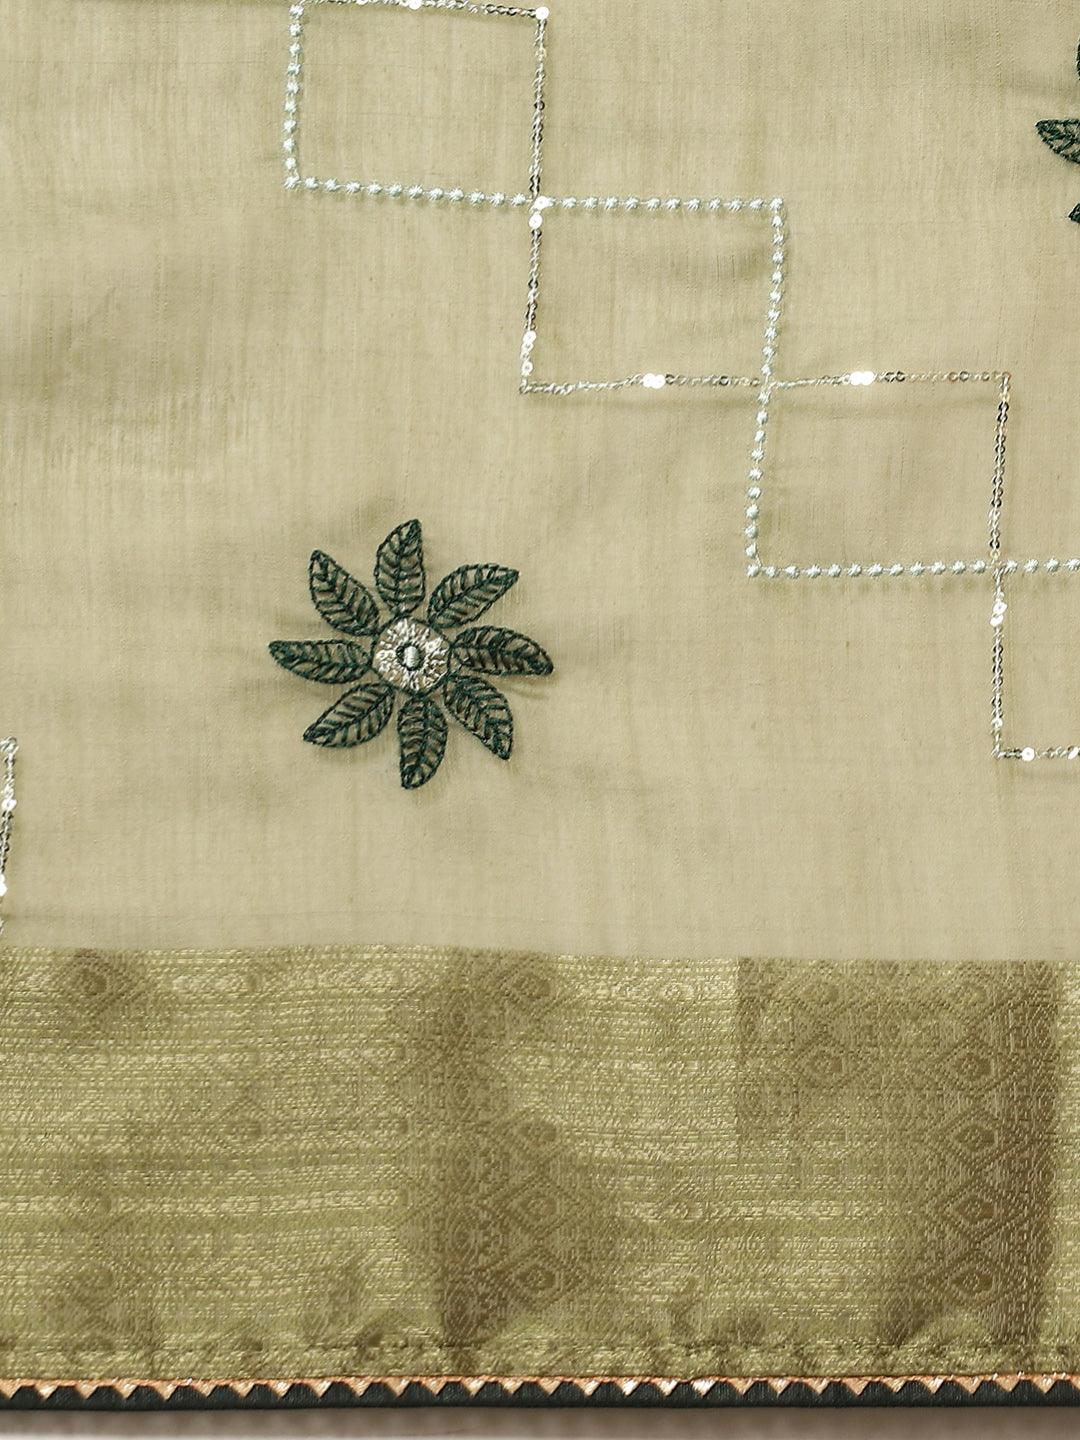 Fancy Poly Cotton Green Color Floral Embroidered Designer Saree - Indiakreations